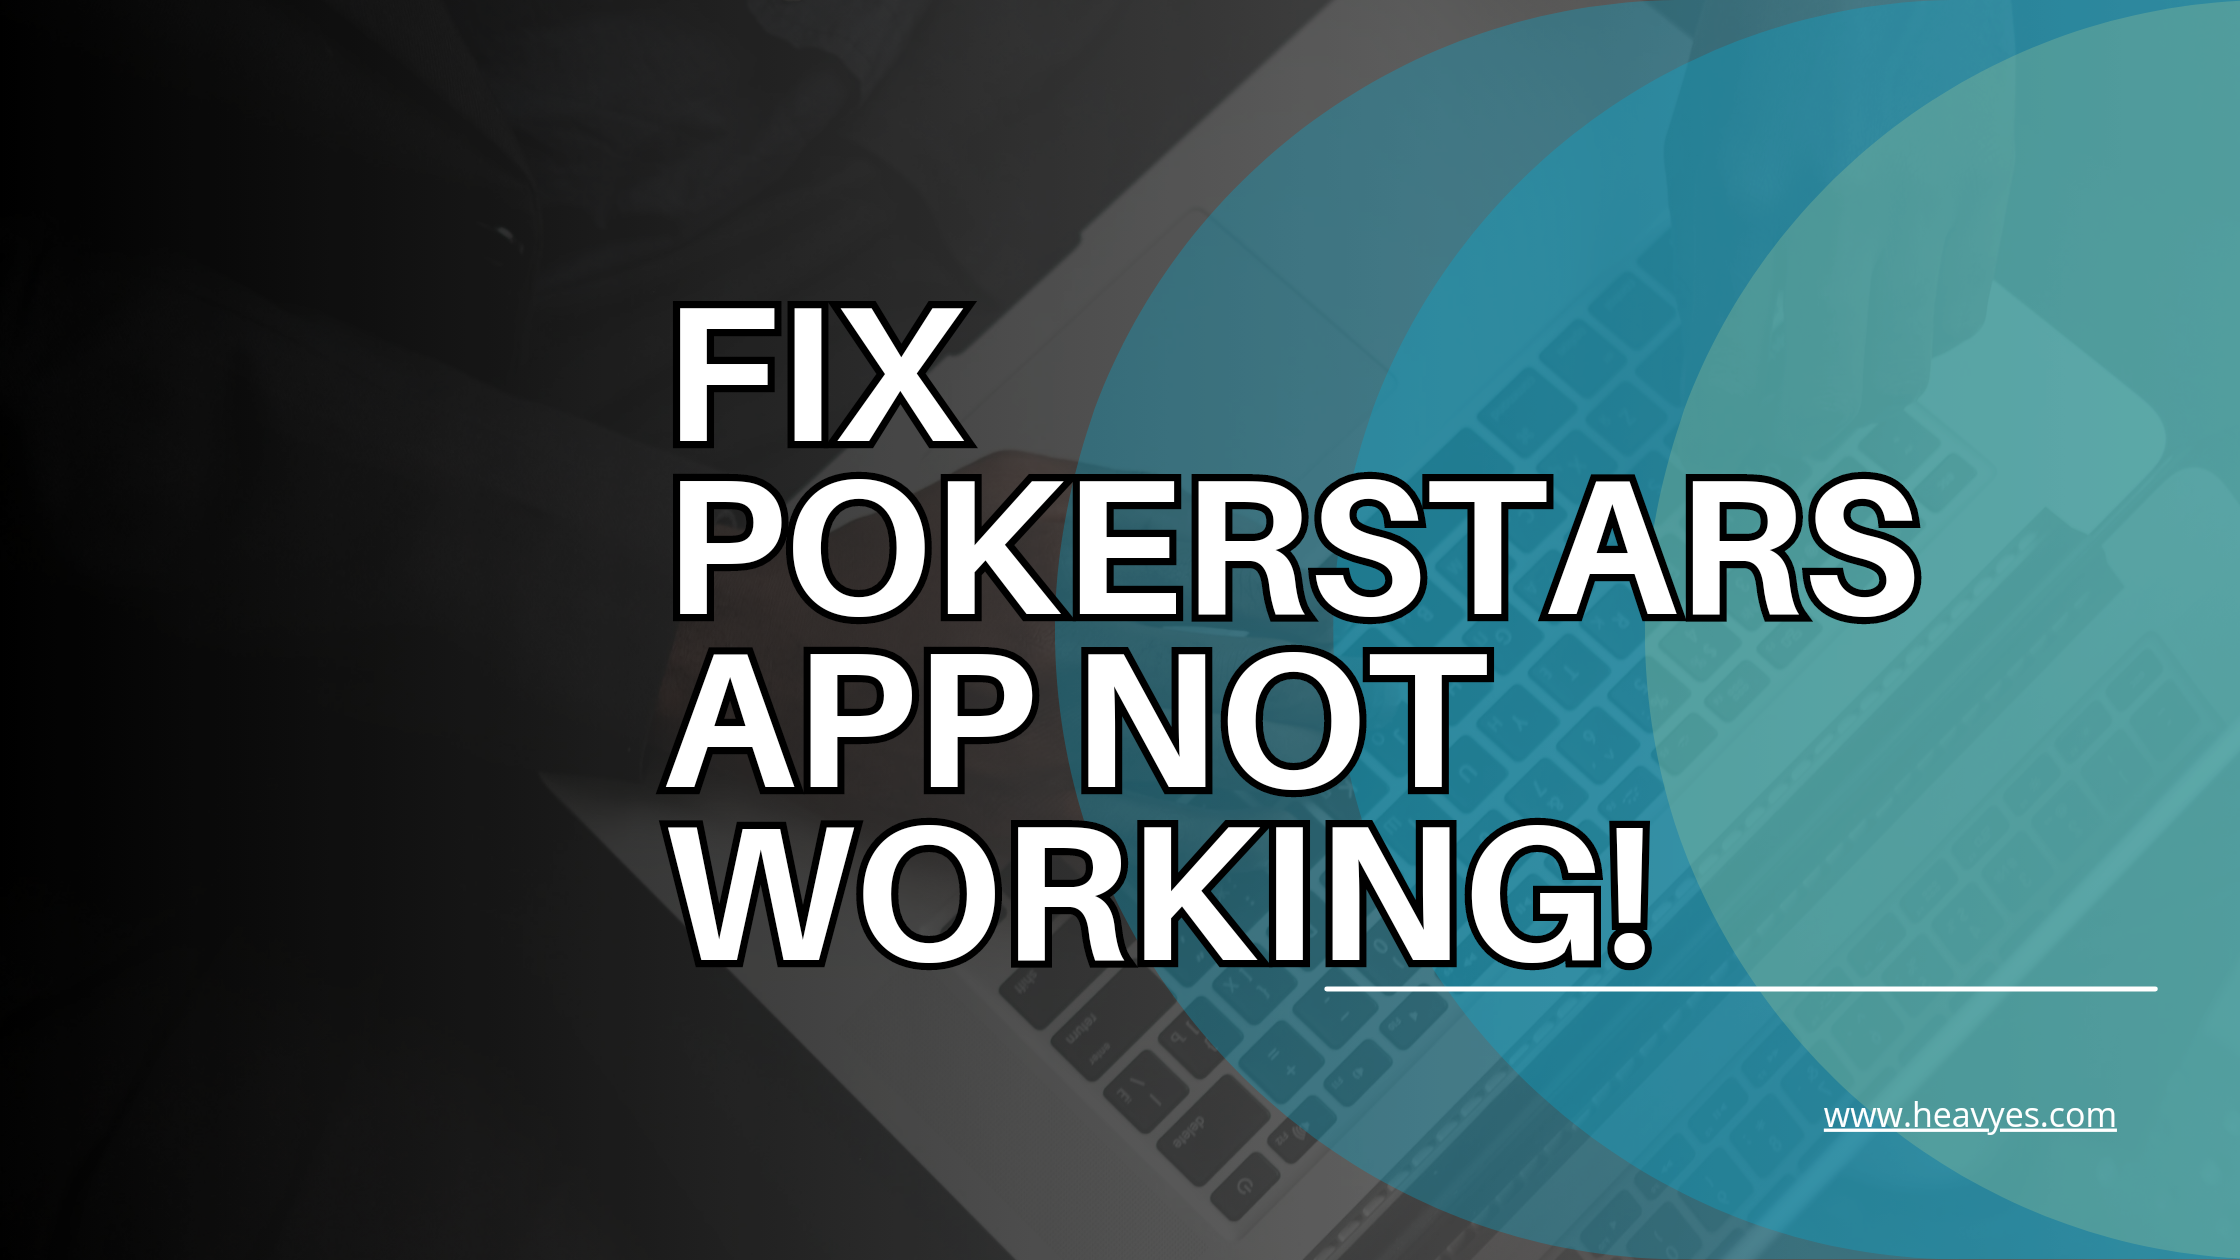 Ways To Troubleshoot If Your Pokerstars App Is Not Working